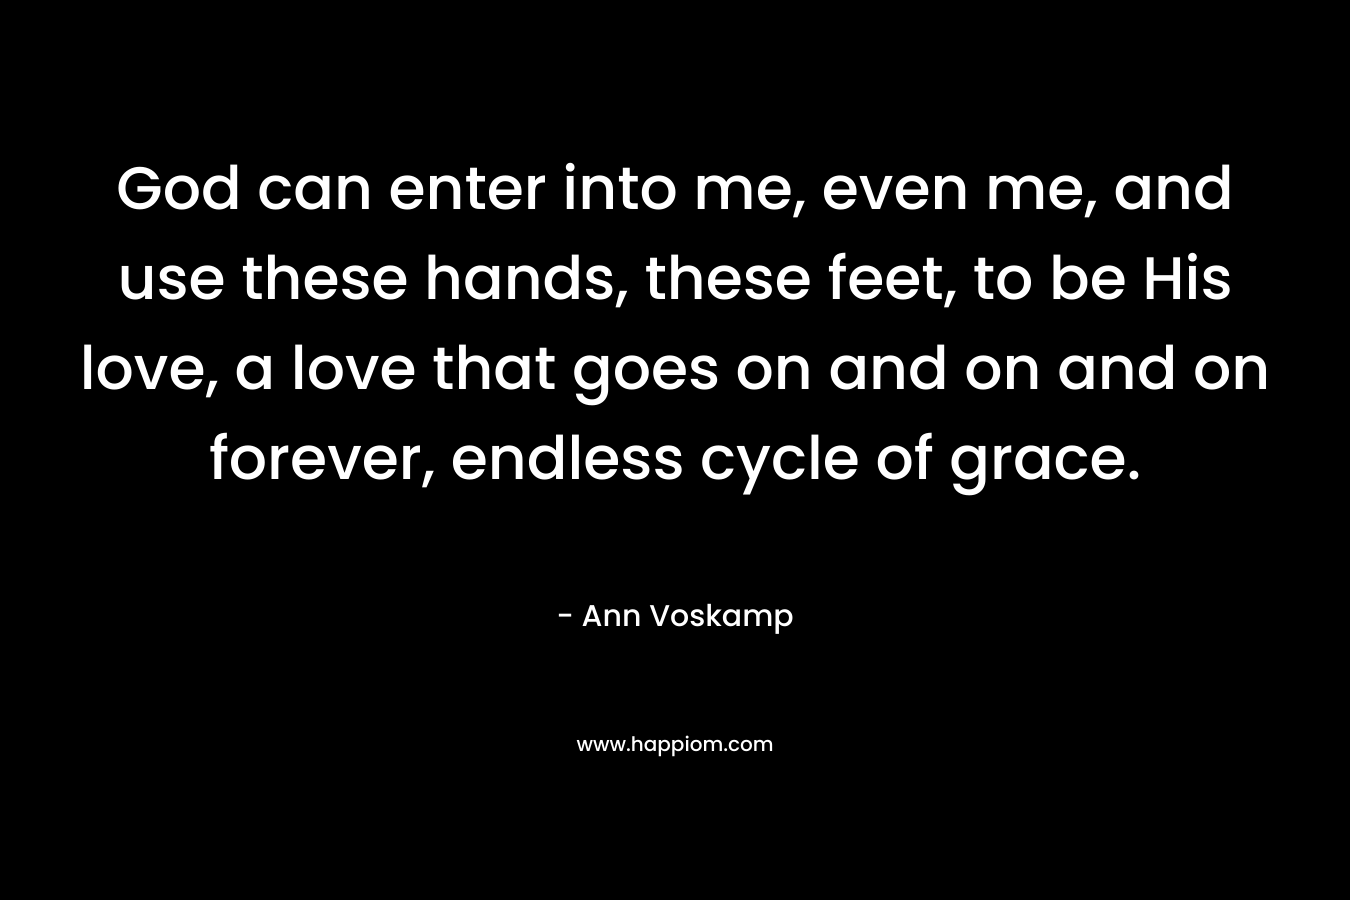 God can enter into me, even me, and use these hands, these feet, to be His love, a love that goes on and on and on forever, endless cycle of grace.